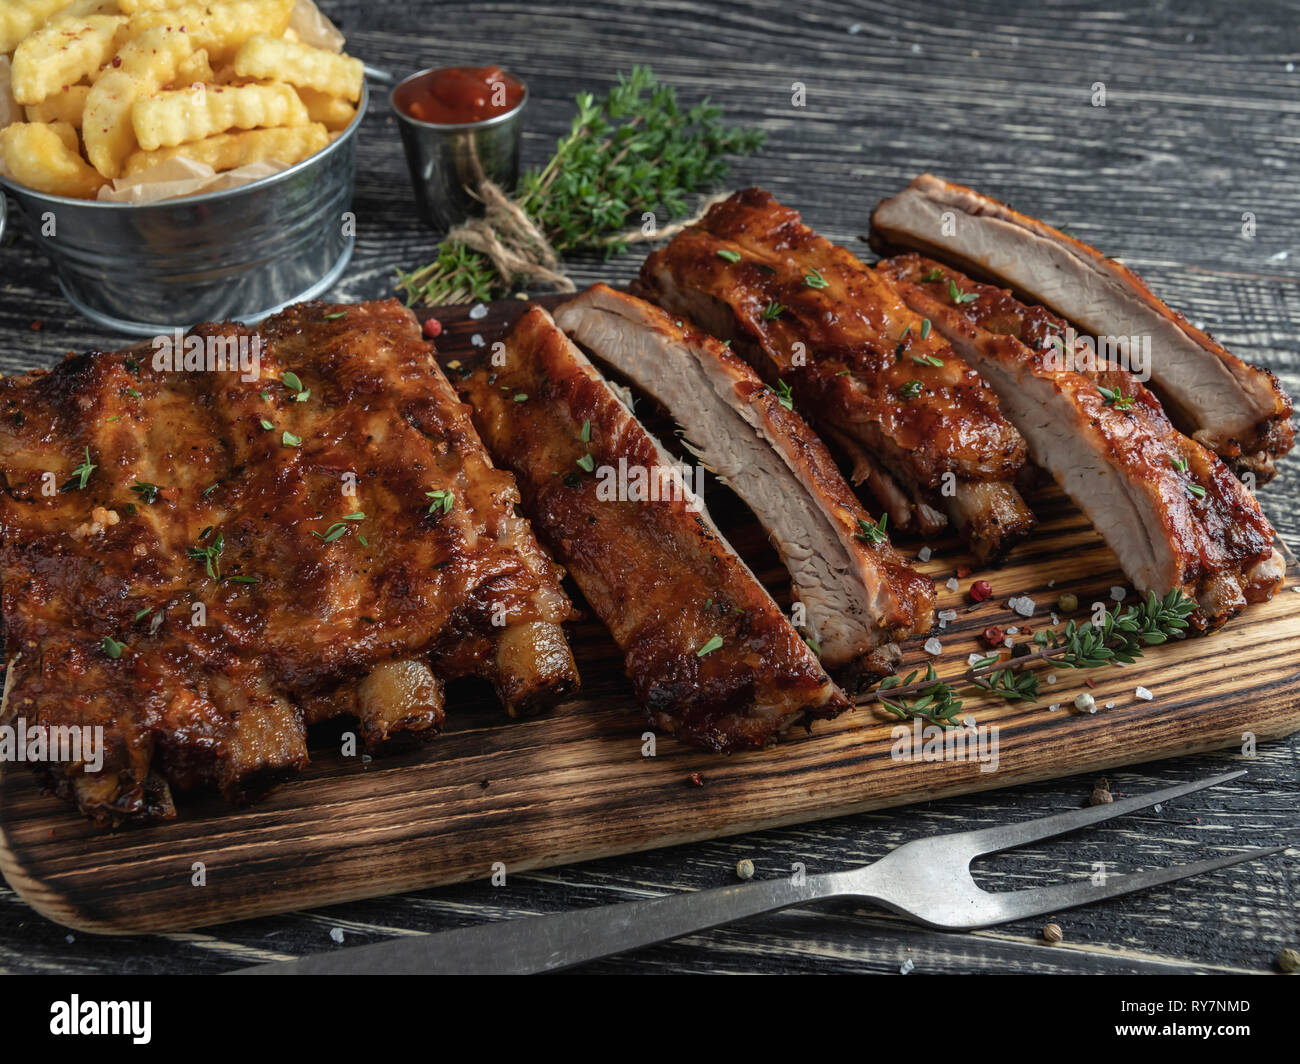 cutting grilled pork ribs with sauce on a board, french fries, spices, wooden background Stock Photo